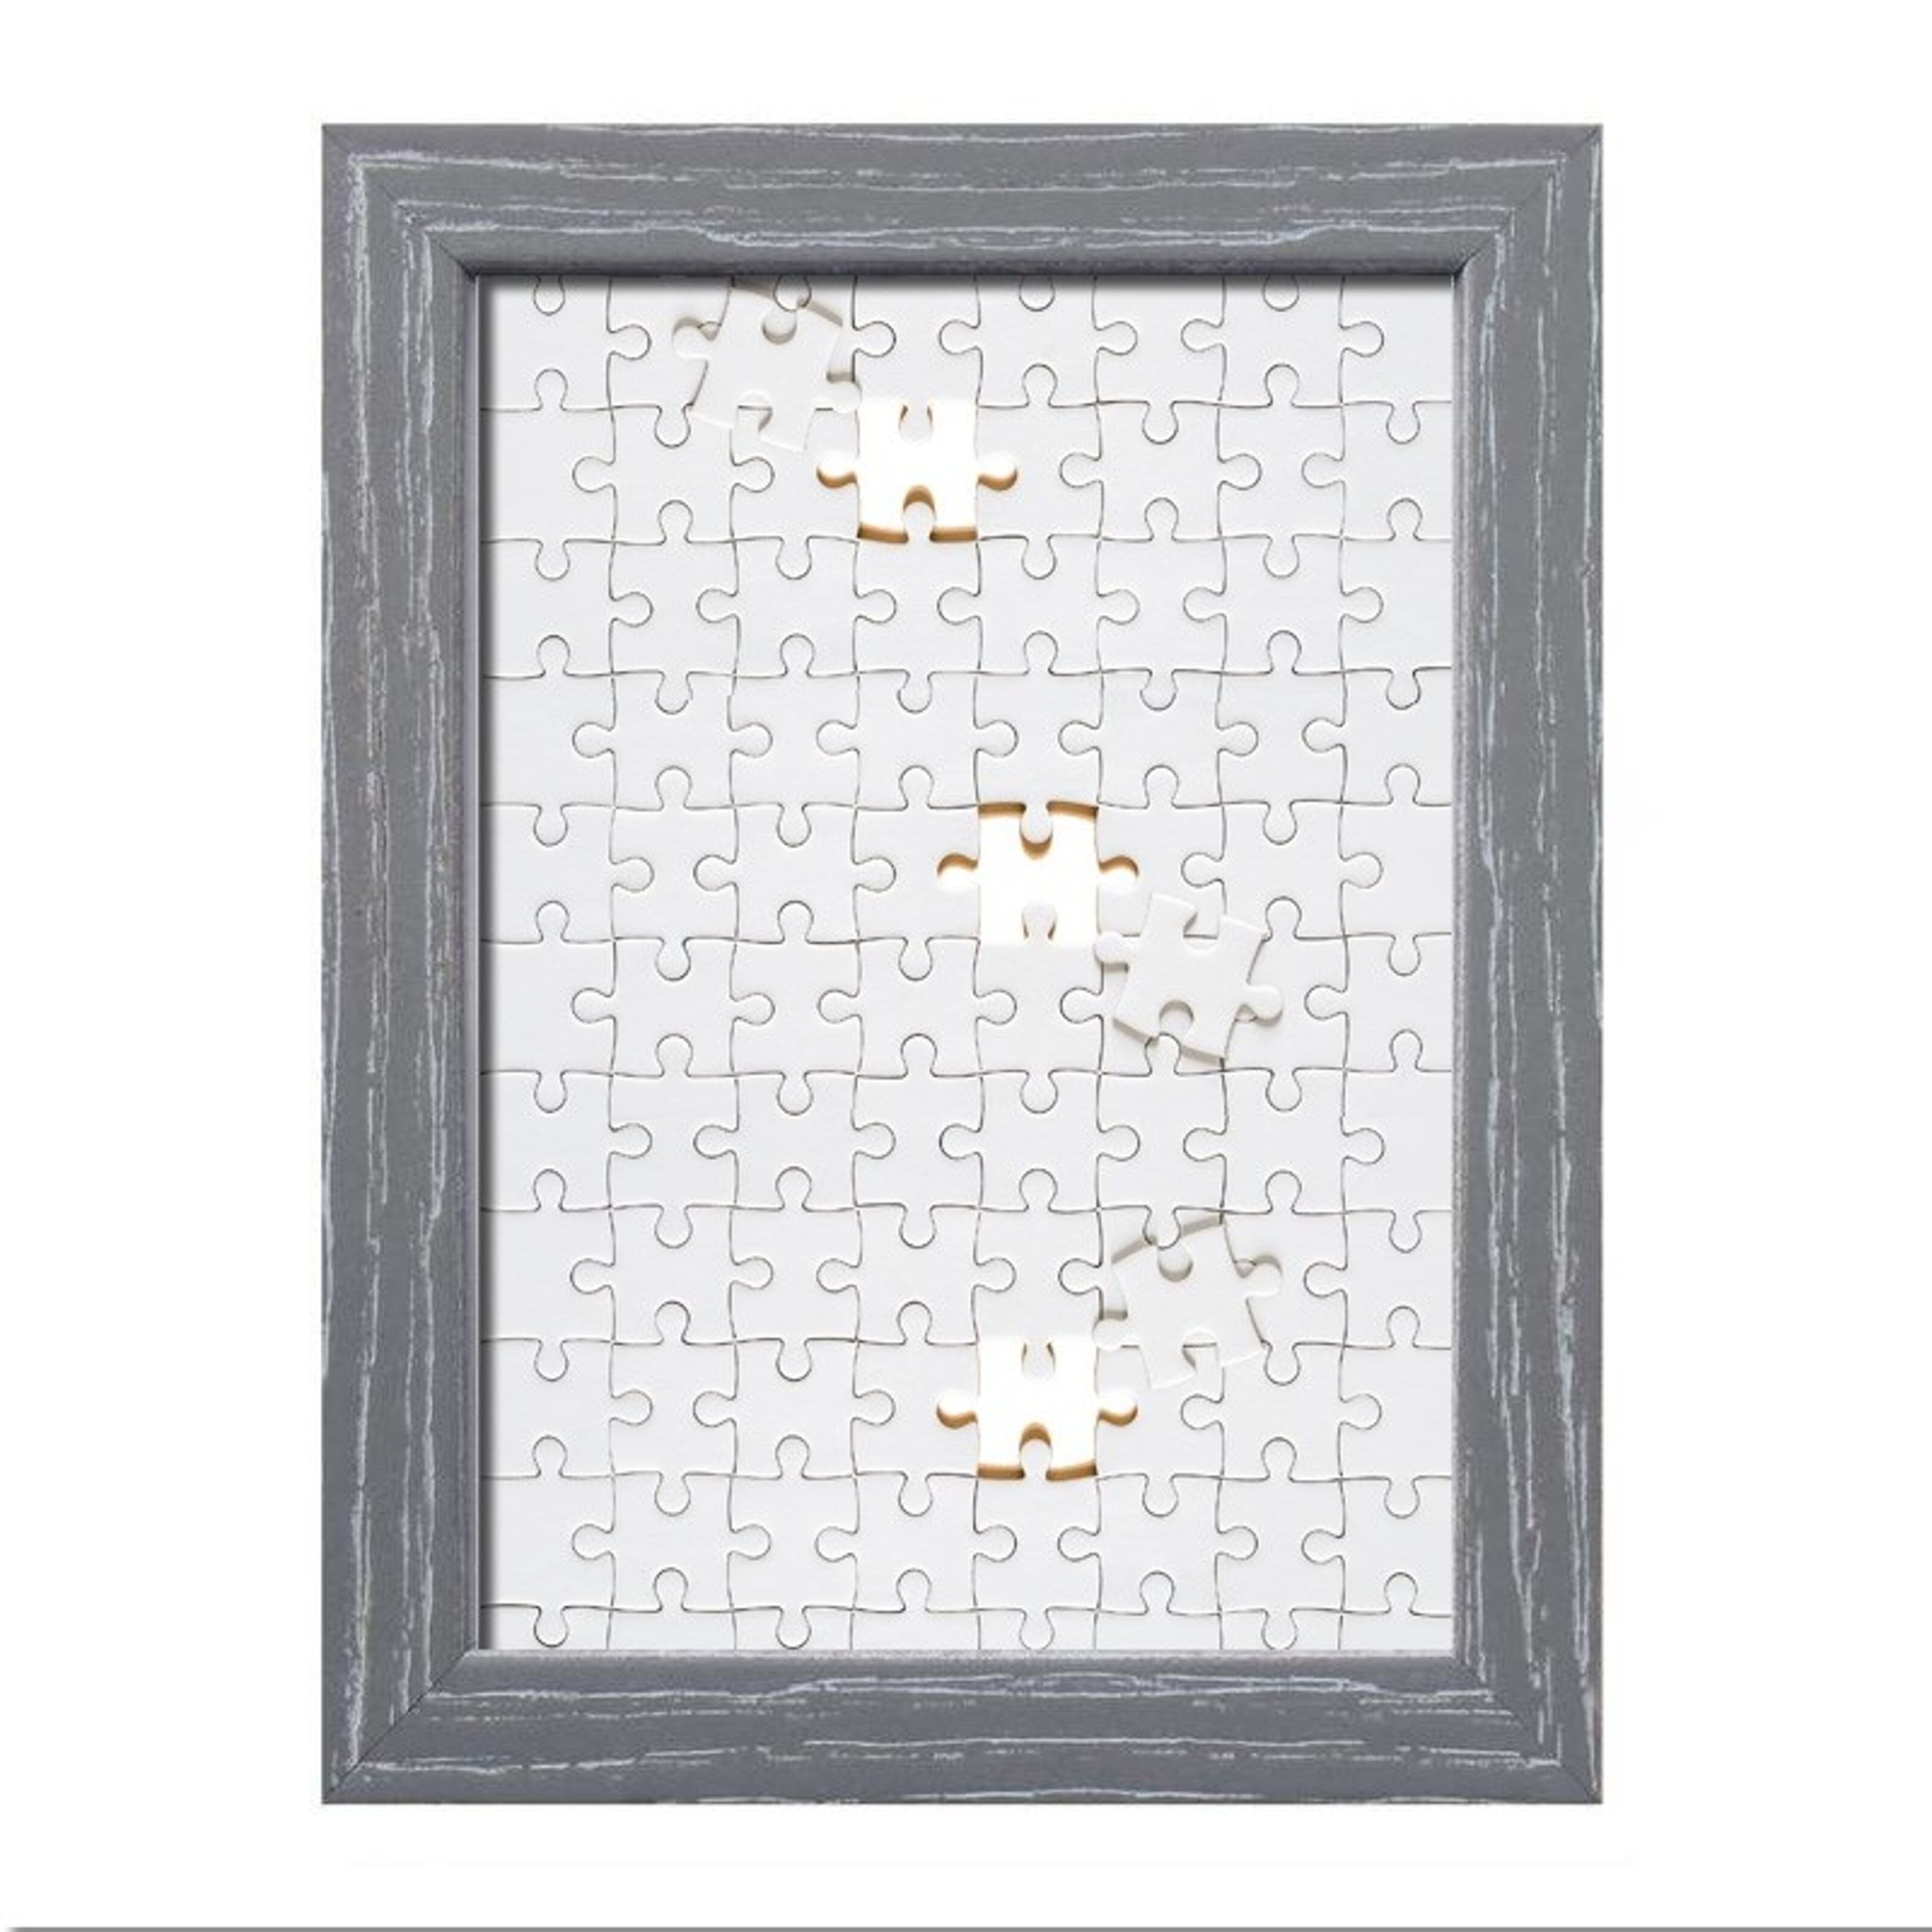 Buy wholesale SHABBY CHIC GRAY Wooden Wall Puzzle Frame